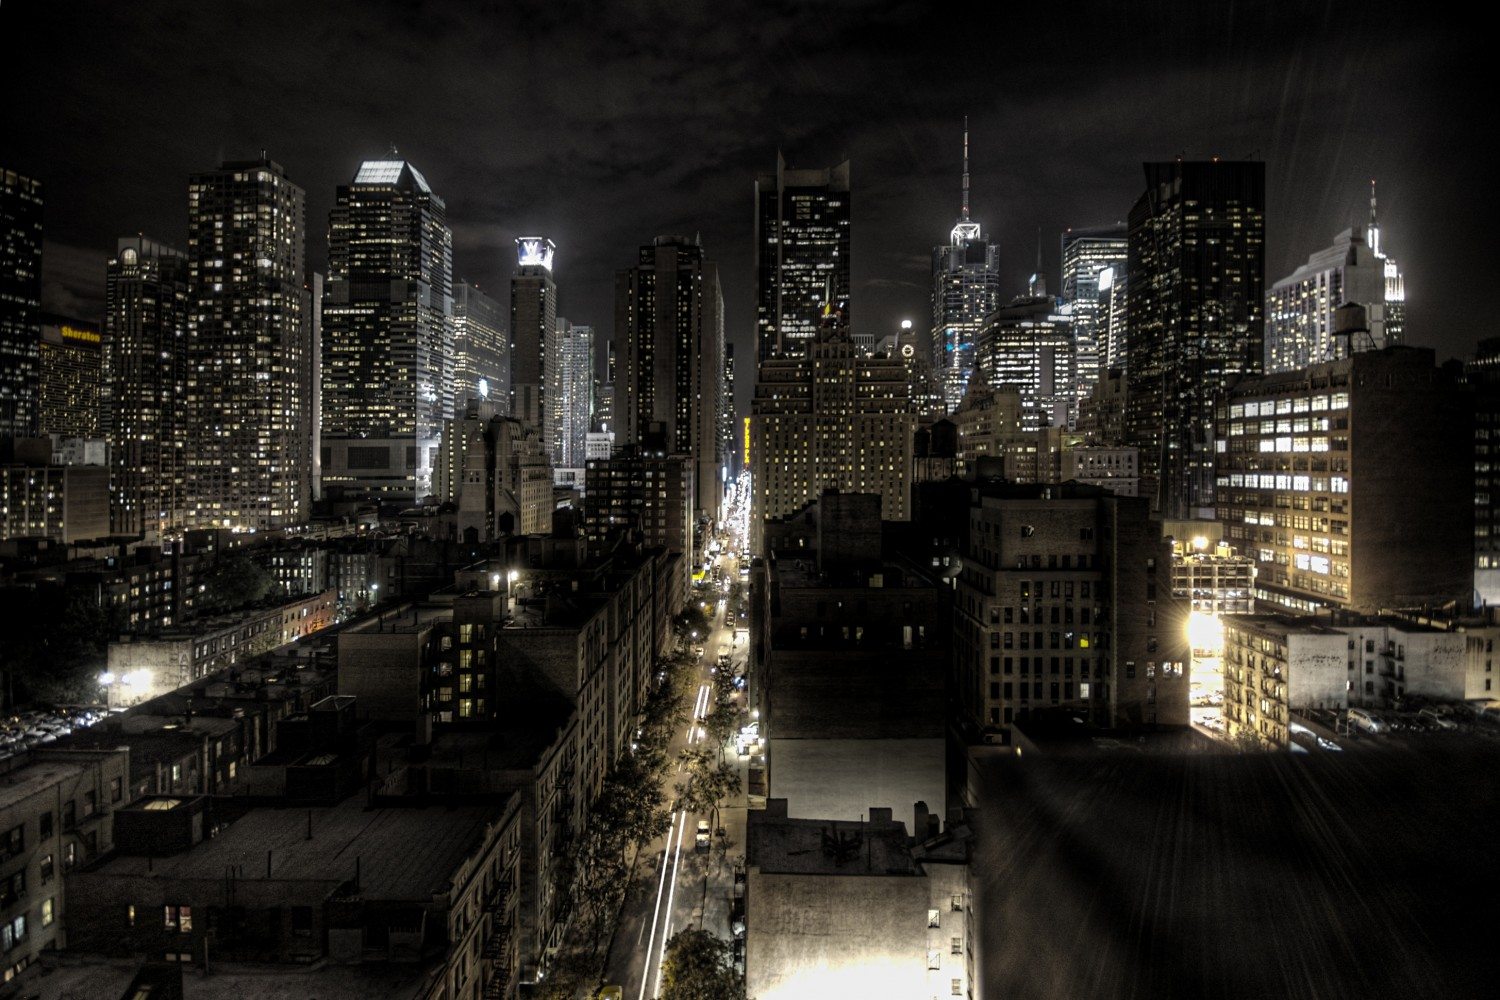 PhotoManhattan Offers a Workshop in Nighttime Photography